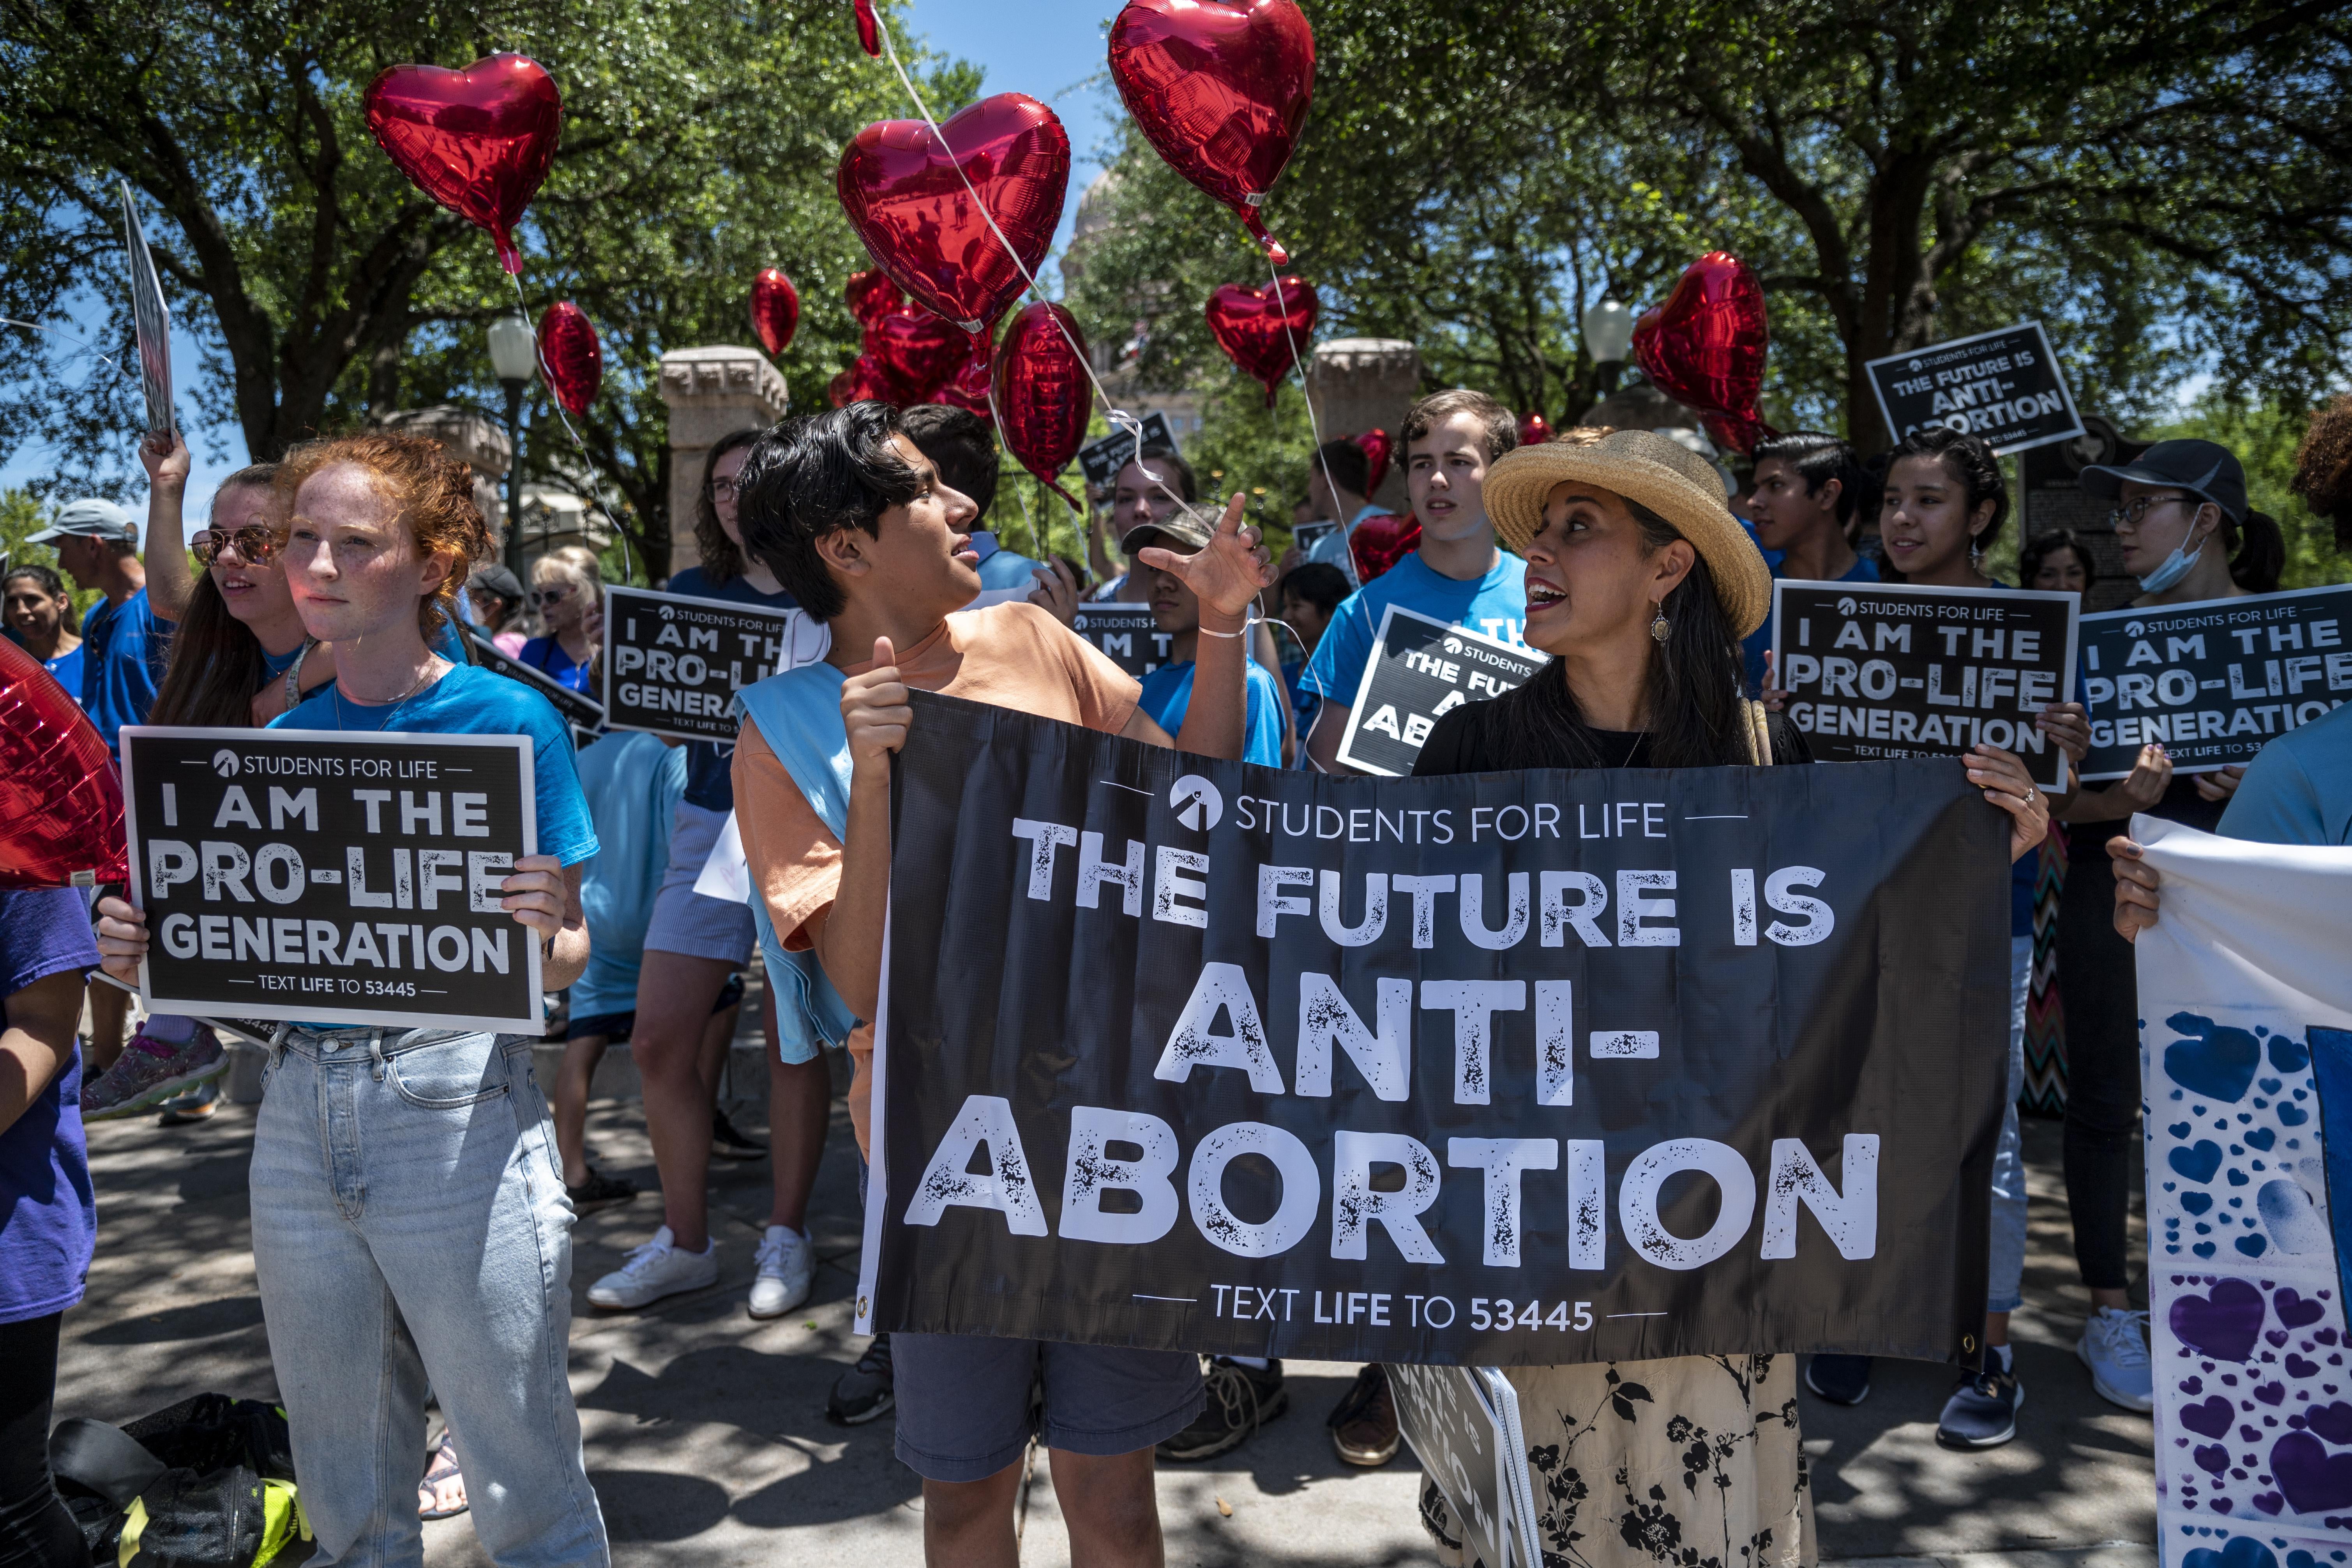 Protesters hold signs that read, "The future is anti-abortion."